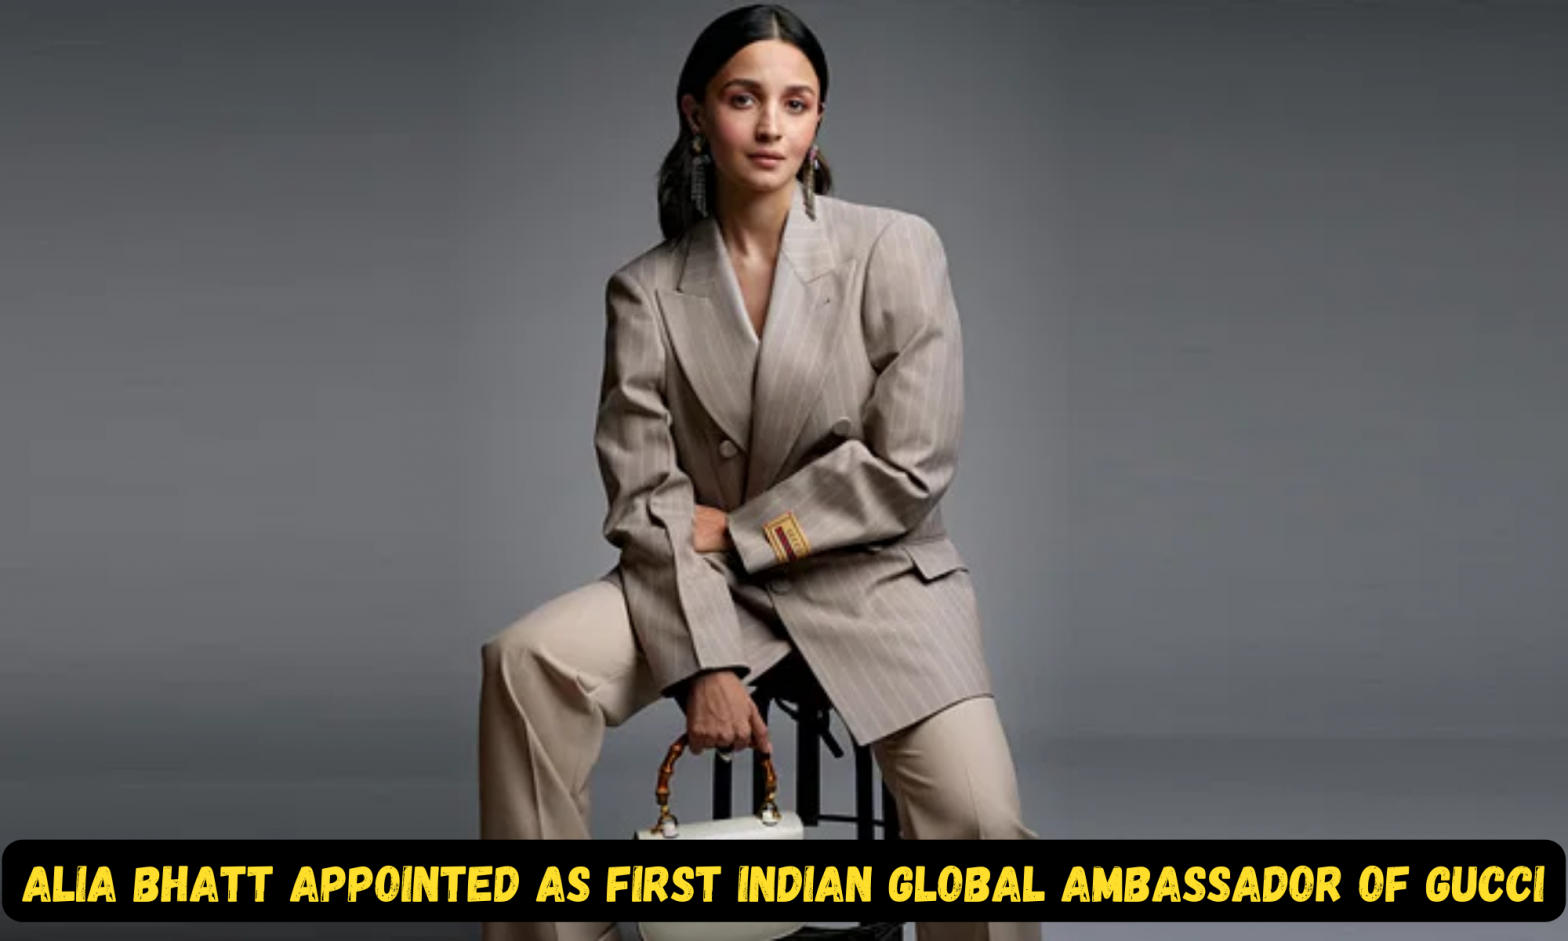 Alia Bhatt appointed as first Indian Global Ambassador of Gucci